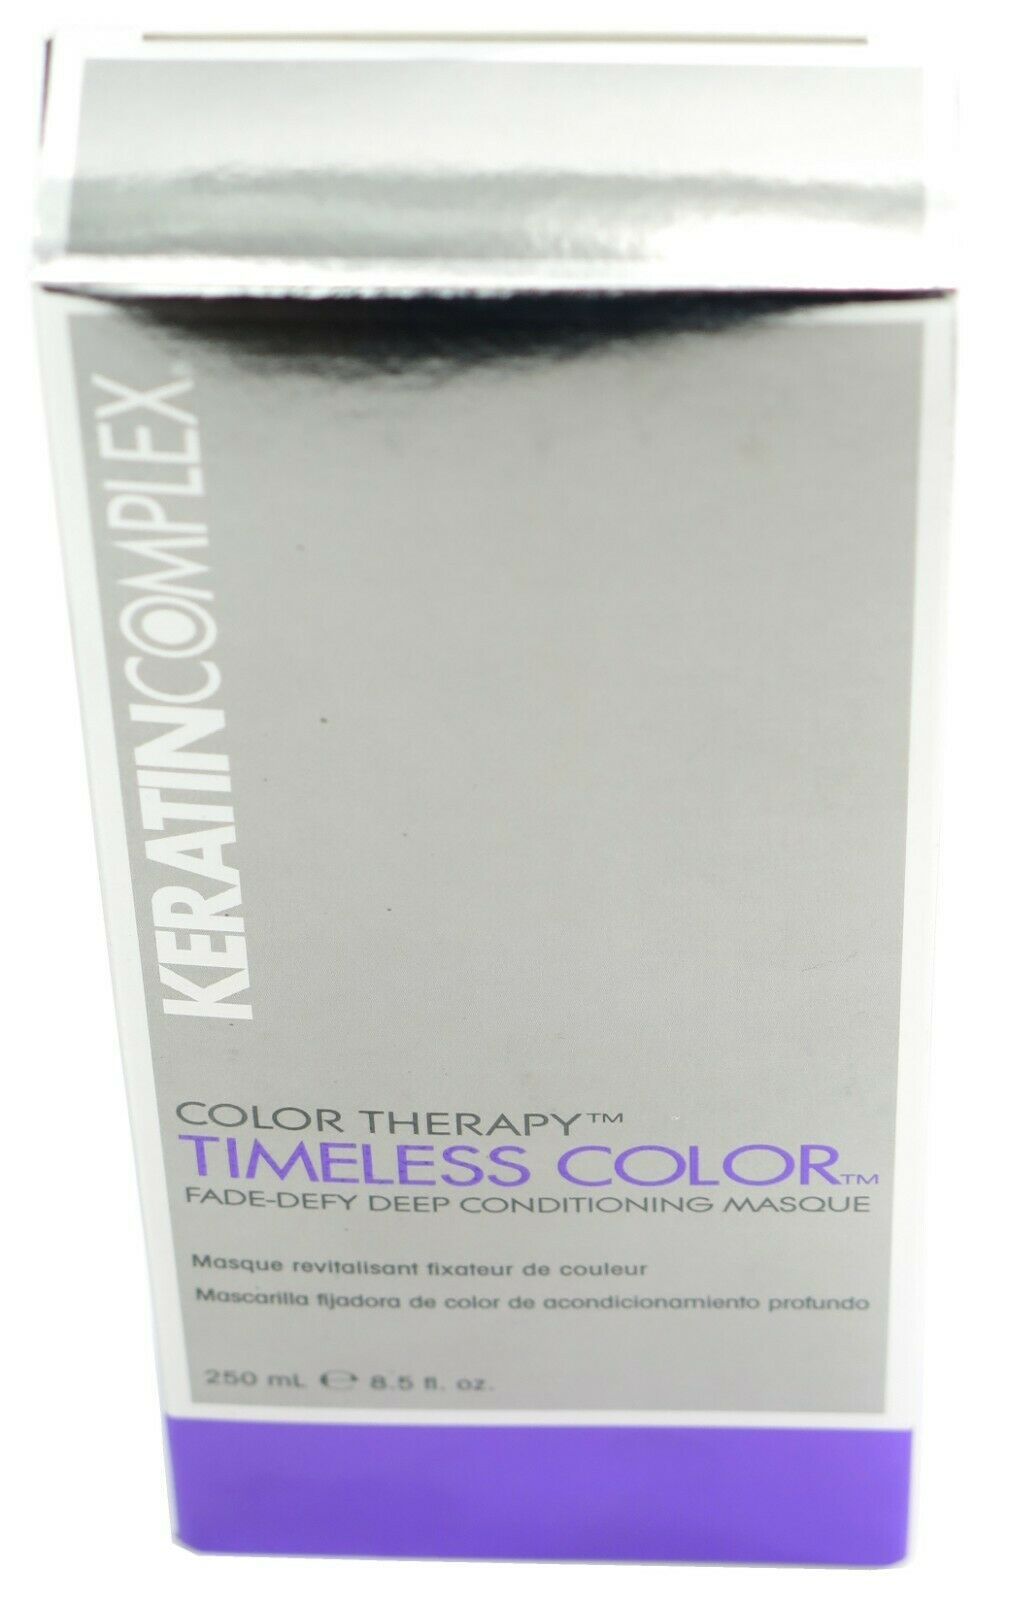 Keratin Complex Color Therapy Timeless Color Deep Conditioning Masque 8.5 fl oz - $19.90